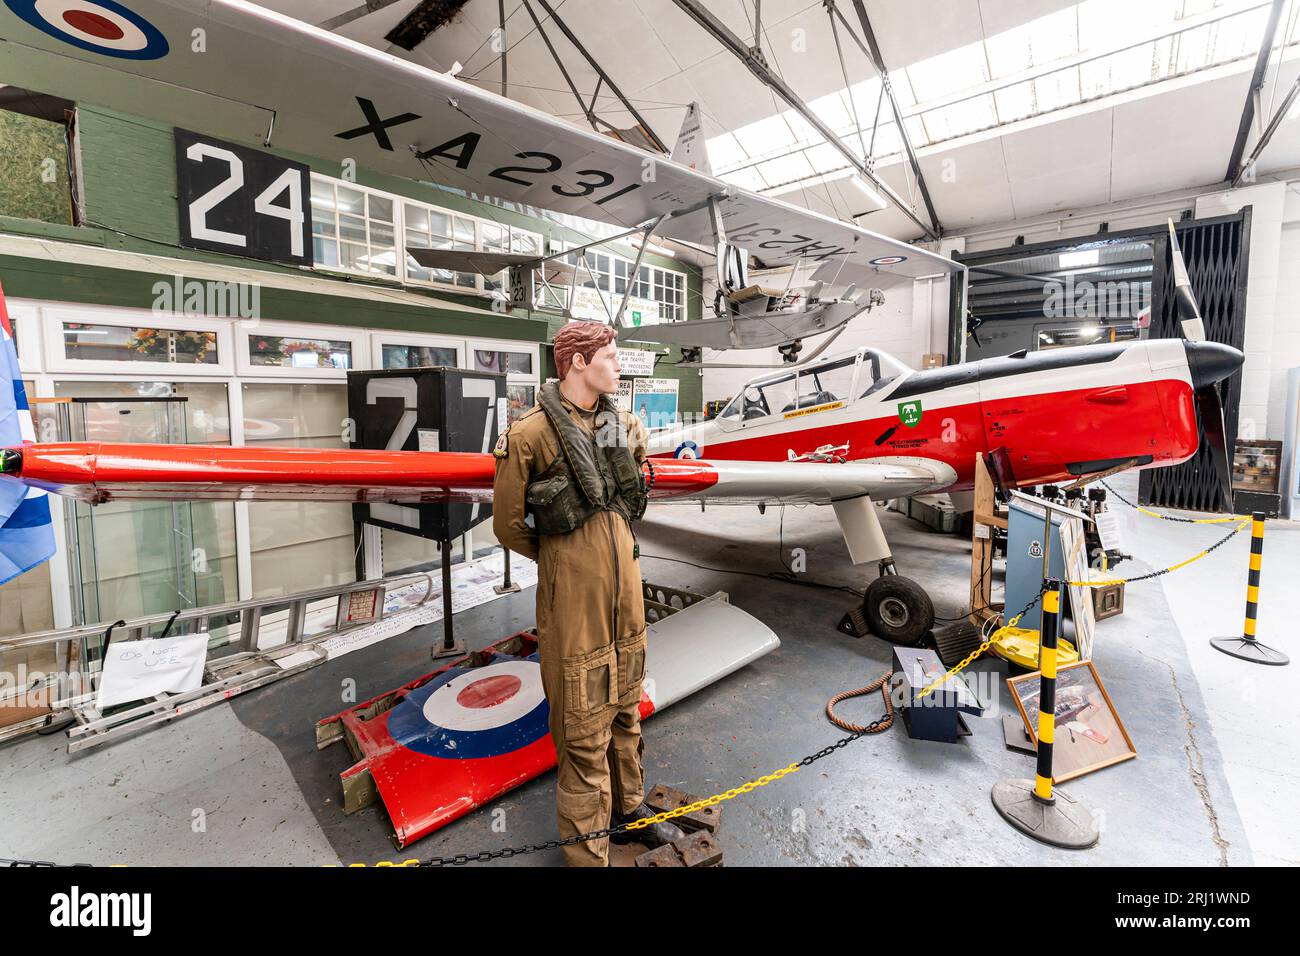 De Havilland Chipmunk trainer plane with pilot figure next to it, and above, suspended from the ceiling, a Slingsby Grasshopper glider. Manston museum Stock Photo